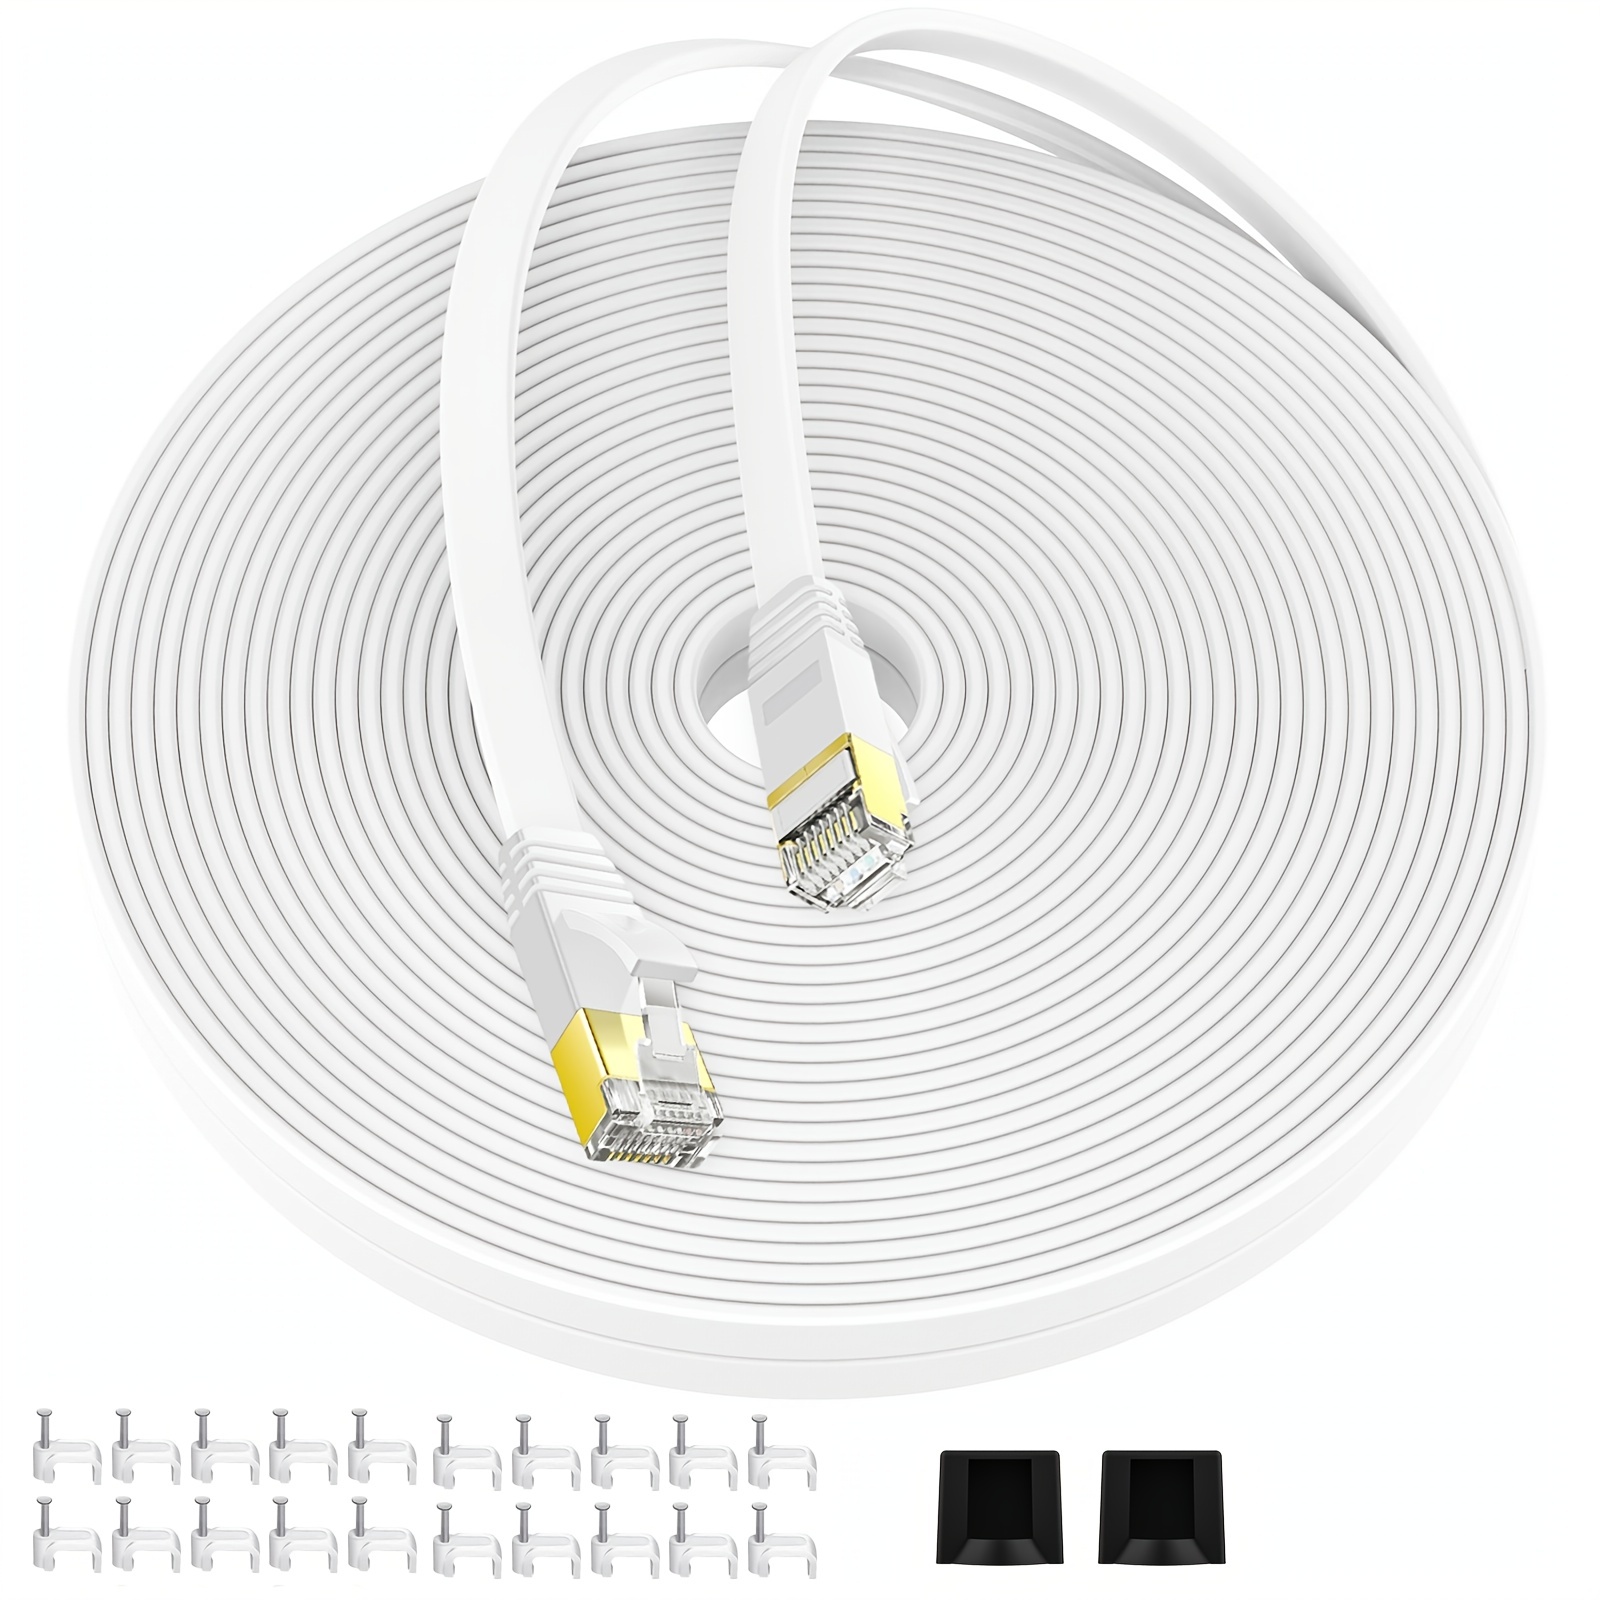  Cat 8 Ethernet Cable, 1.5Ft 3Ft 6Ft 10Ft 15Ft 20Ft 30Ft 40Ft  50Ft 60Ft 100Ft Heavy Duty High Speed Internet Network Cable, Professional LAN  Cable Shielded in Wall, Indoor&Outdoor : Electronics